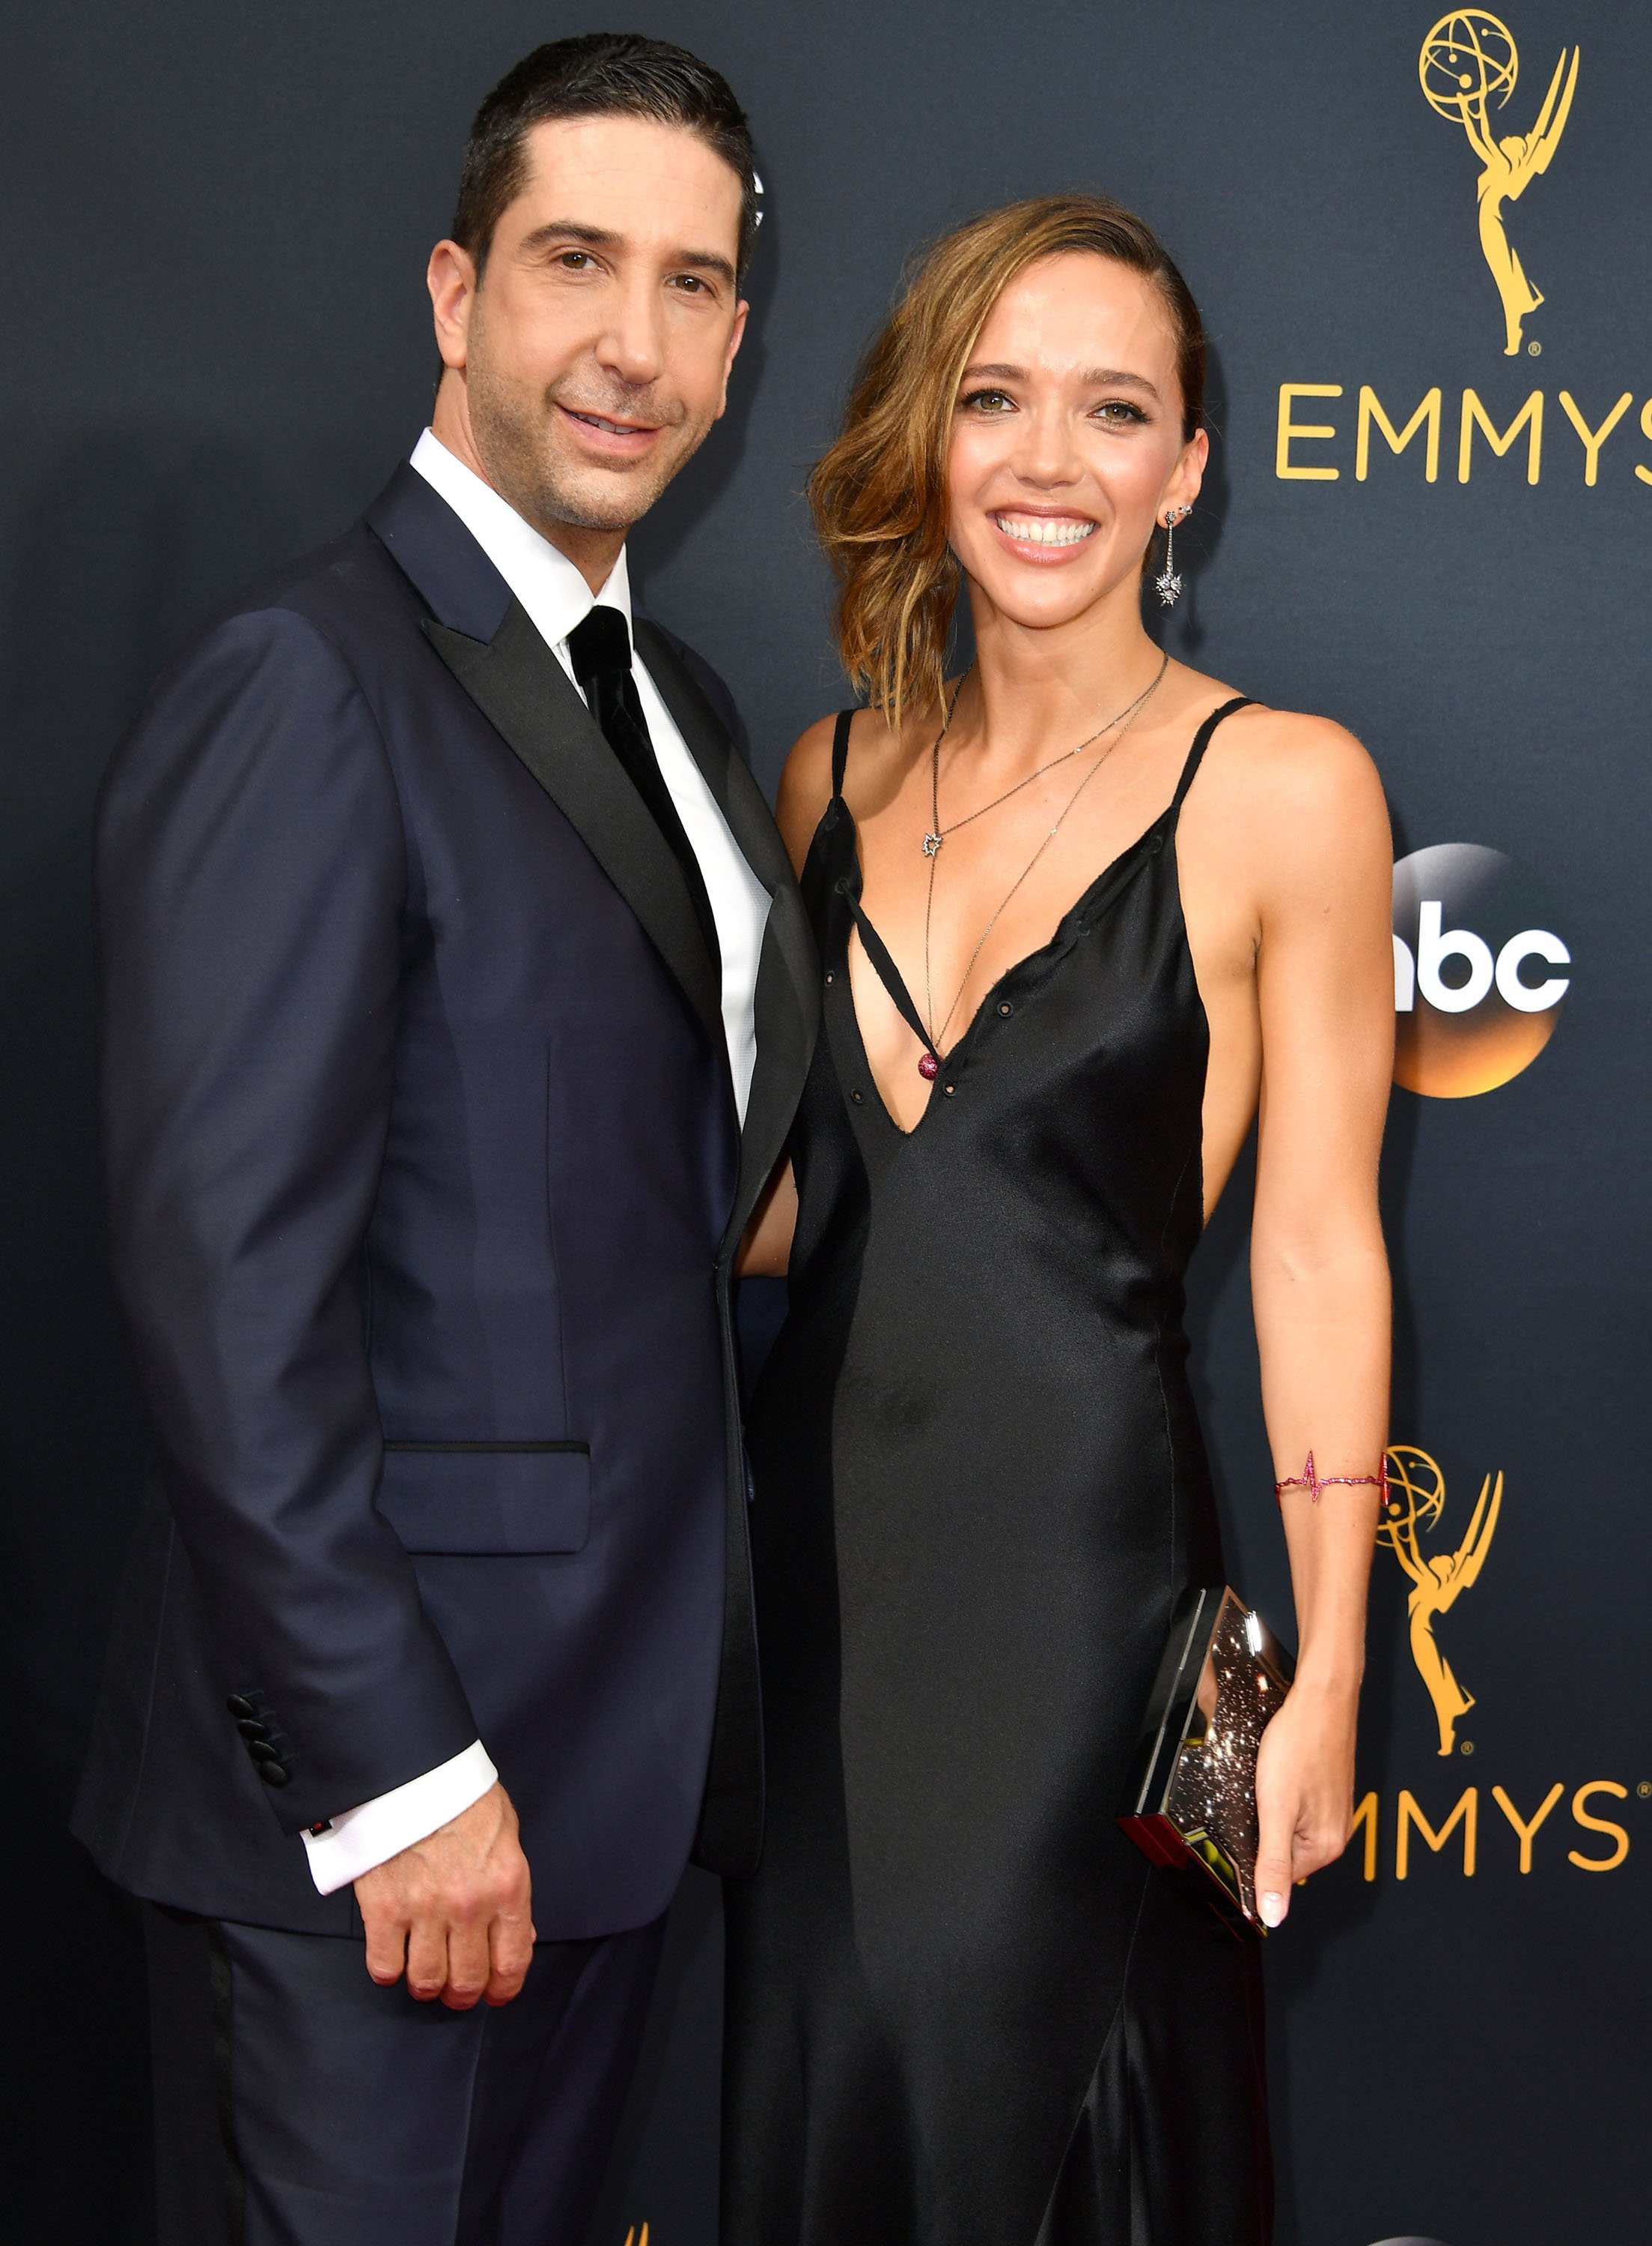 Zoe Buckman and David Schwimmer arrive at the 68th Annual Primetime Emmy Awards at Microsoft Theater on September 18, 2016 in Los Angeles, California. | Source: Getty Images